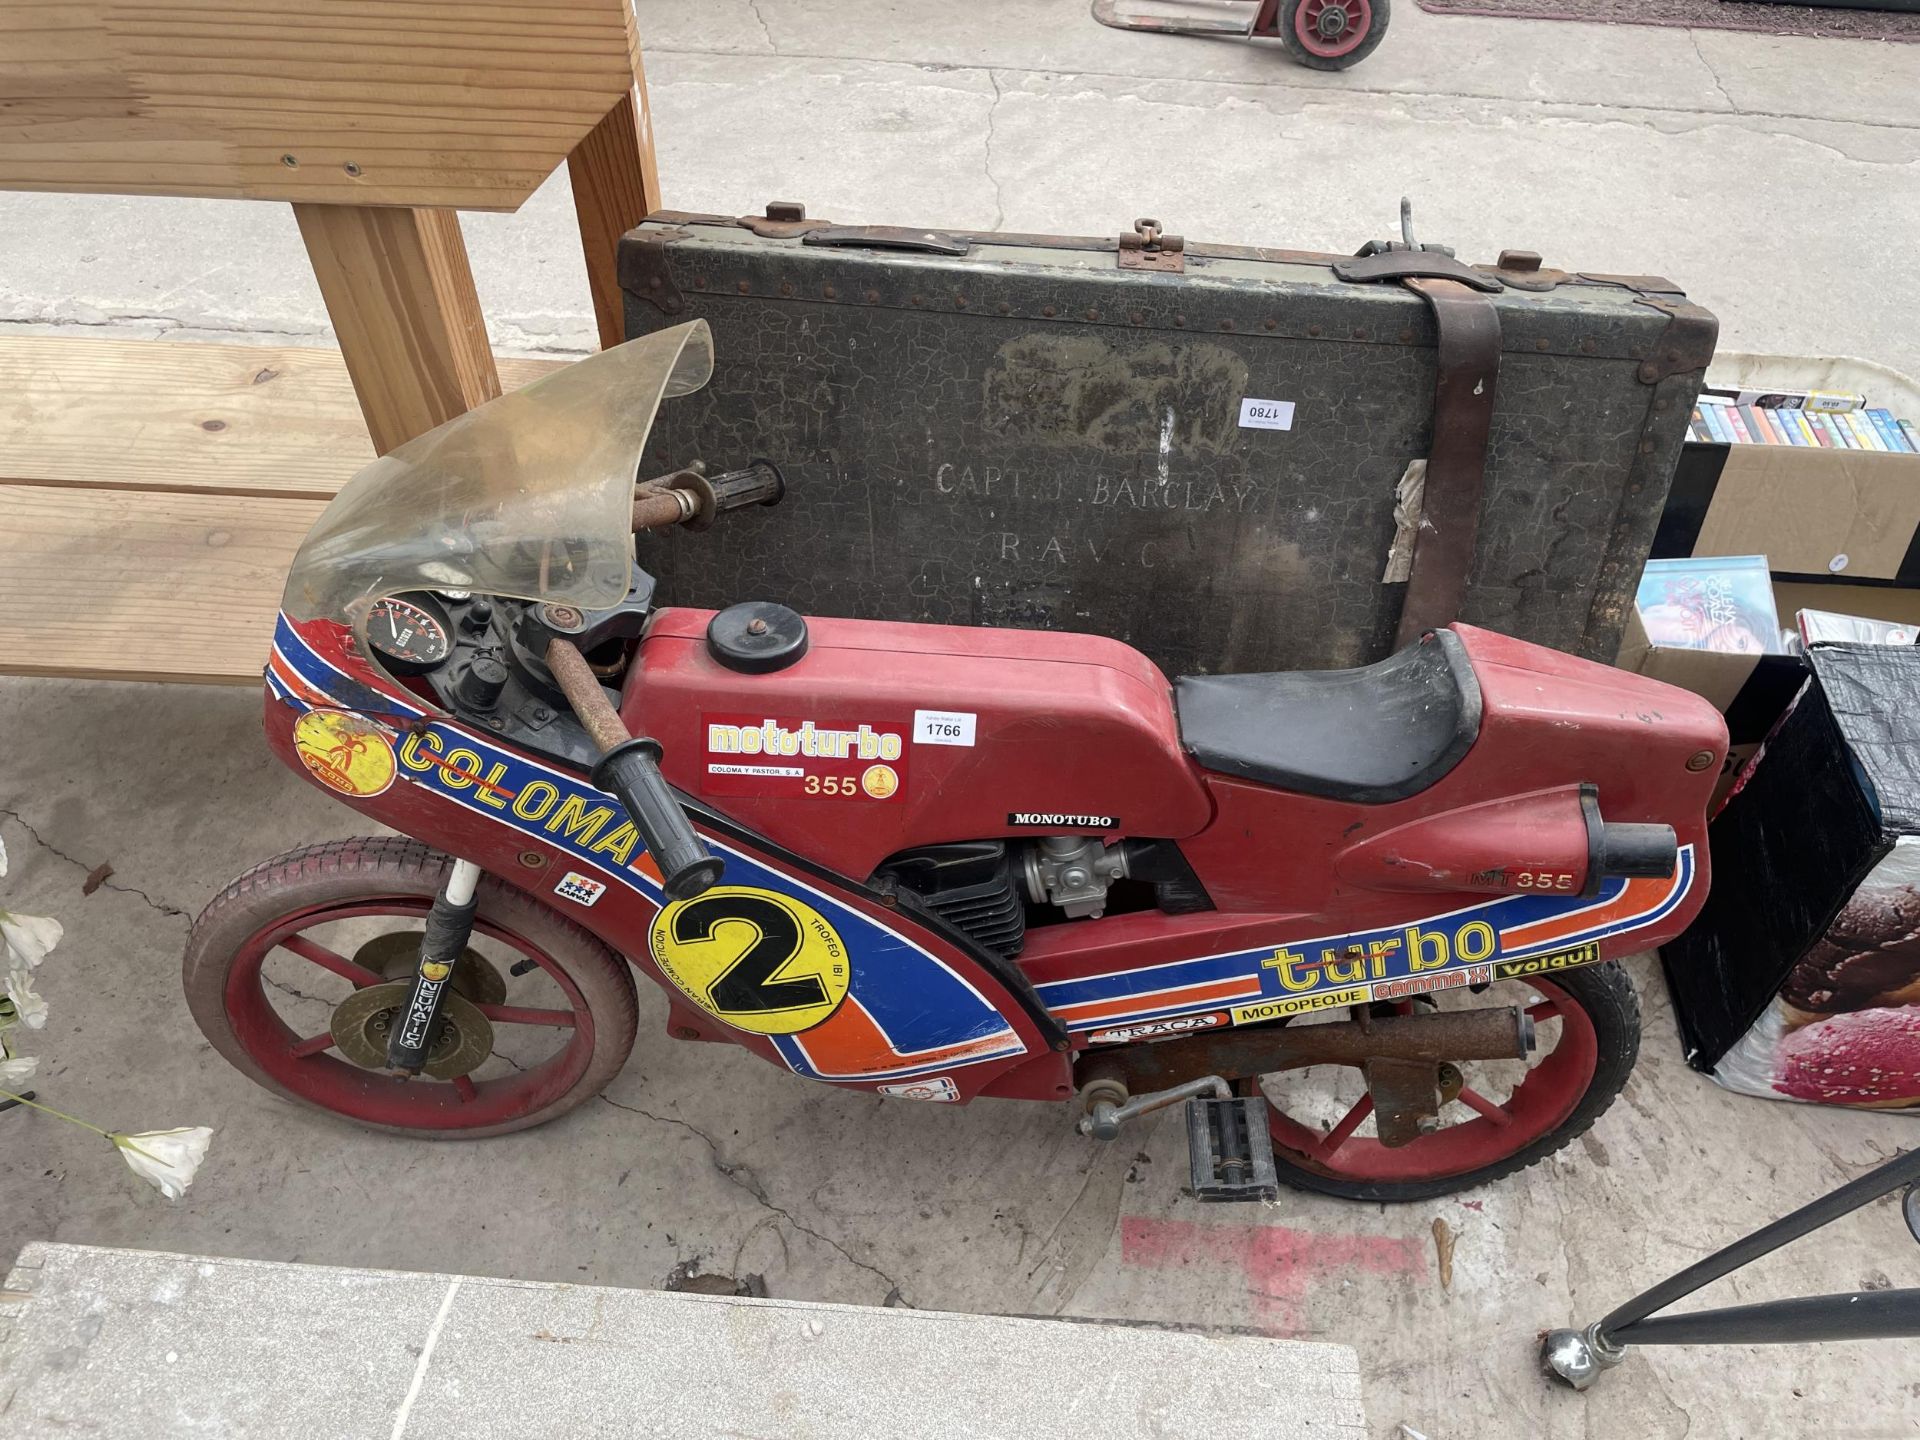 A VINTAGE CHILDS PEDAL BIKE IN THE FORM OF A MOTORBIKE